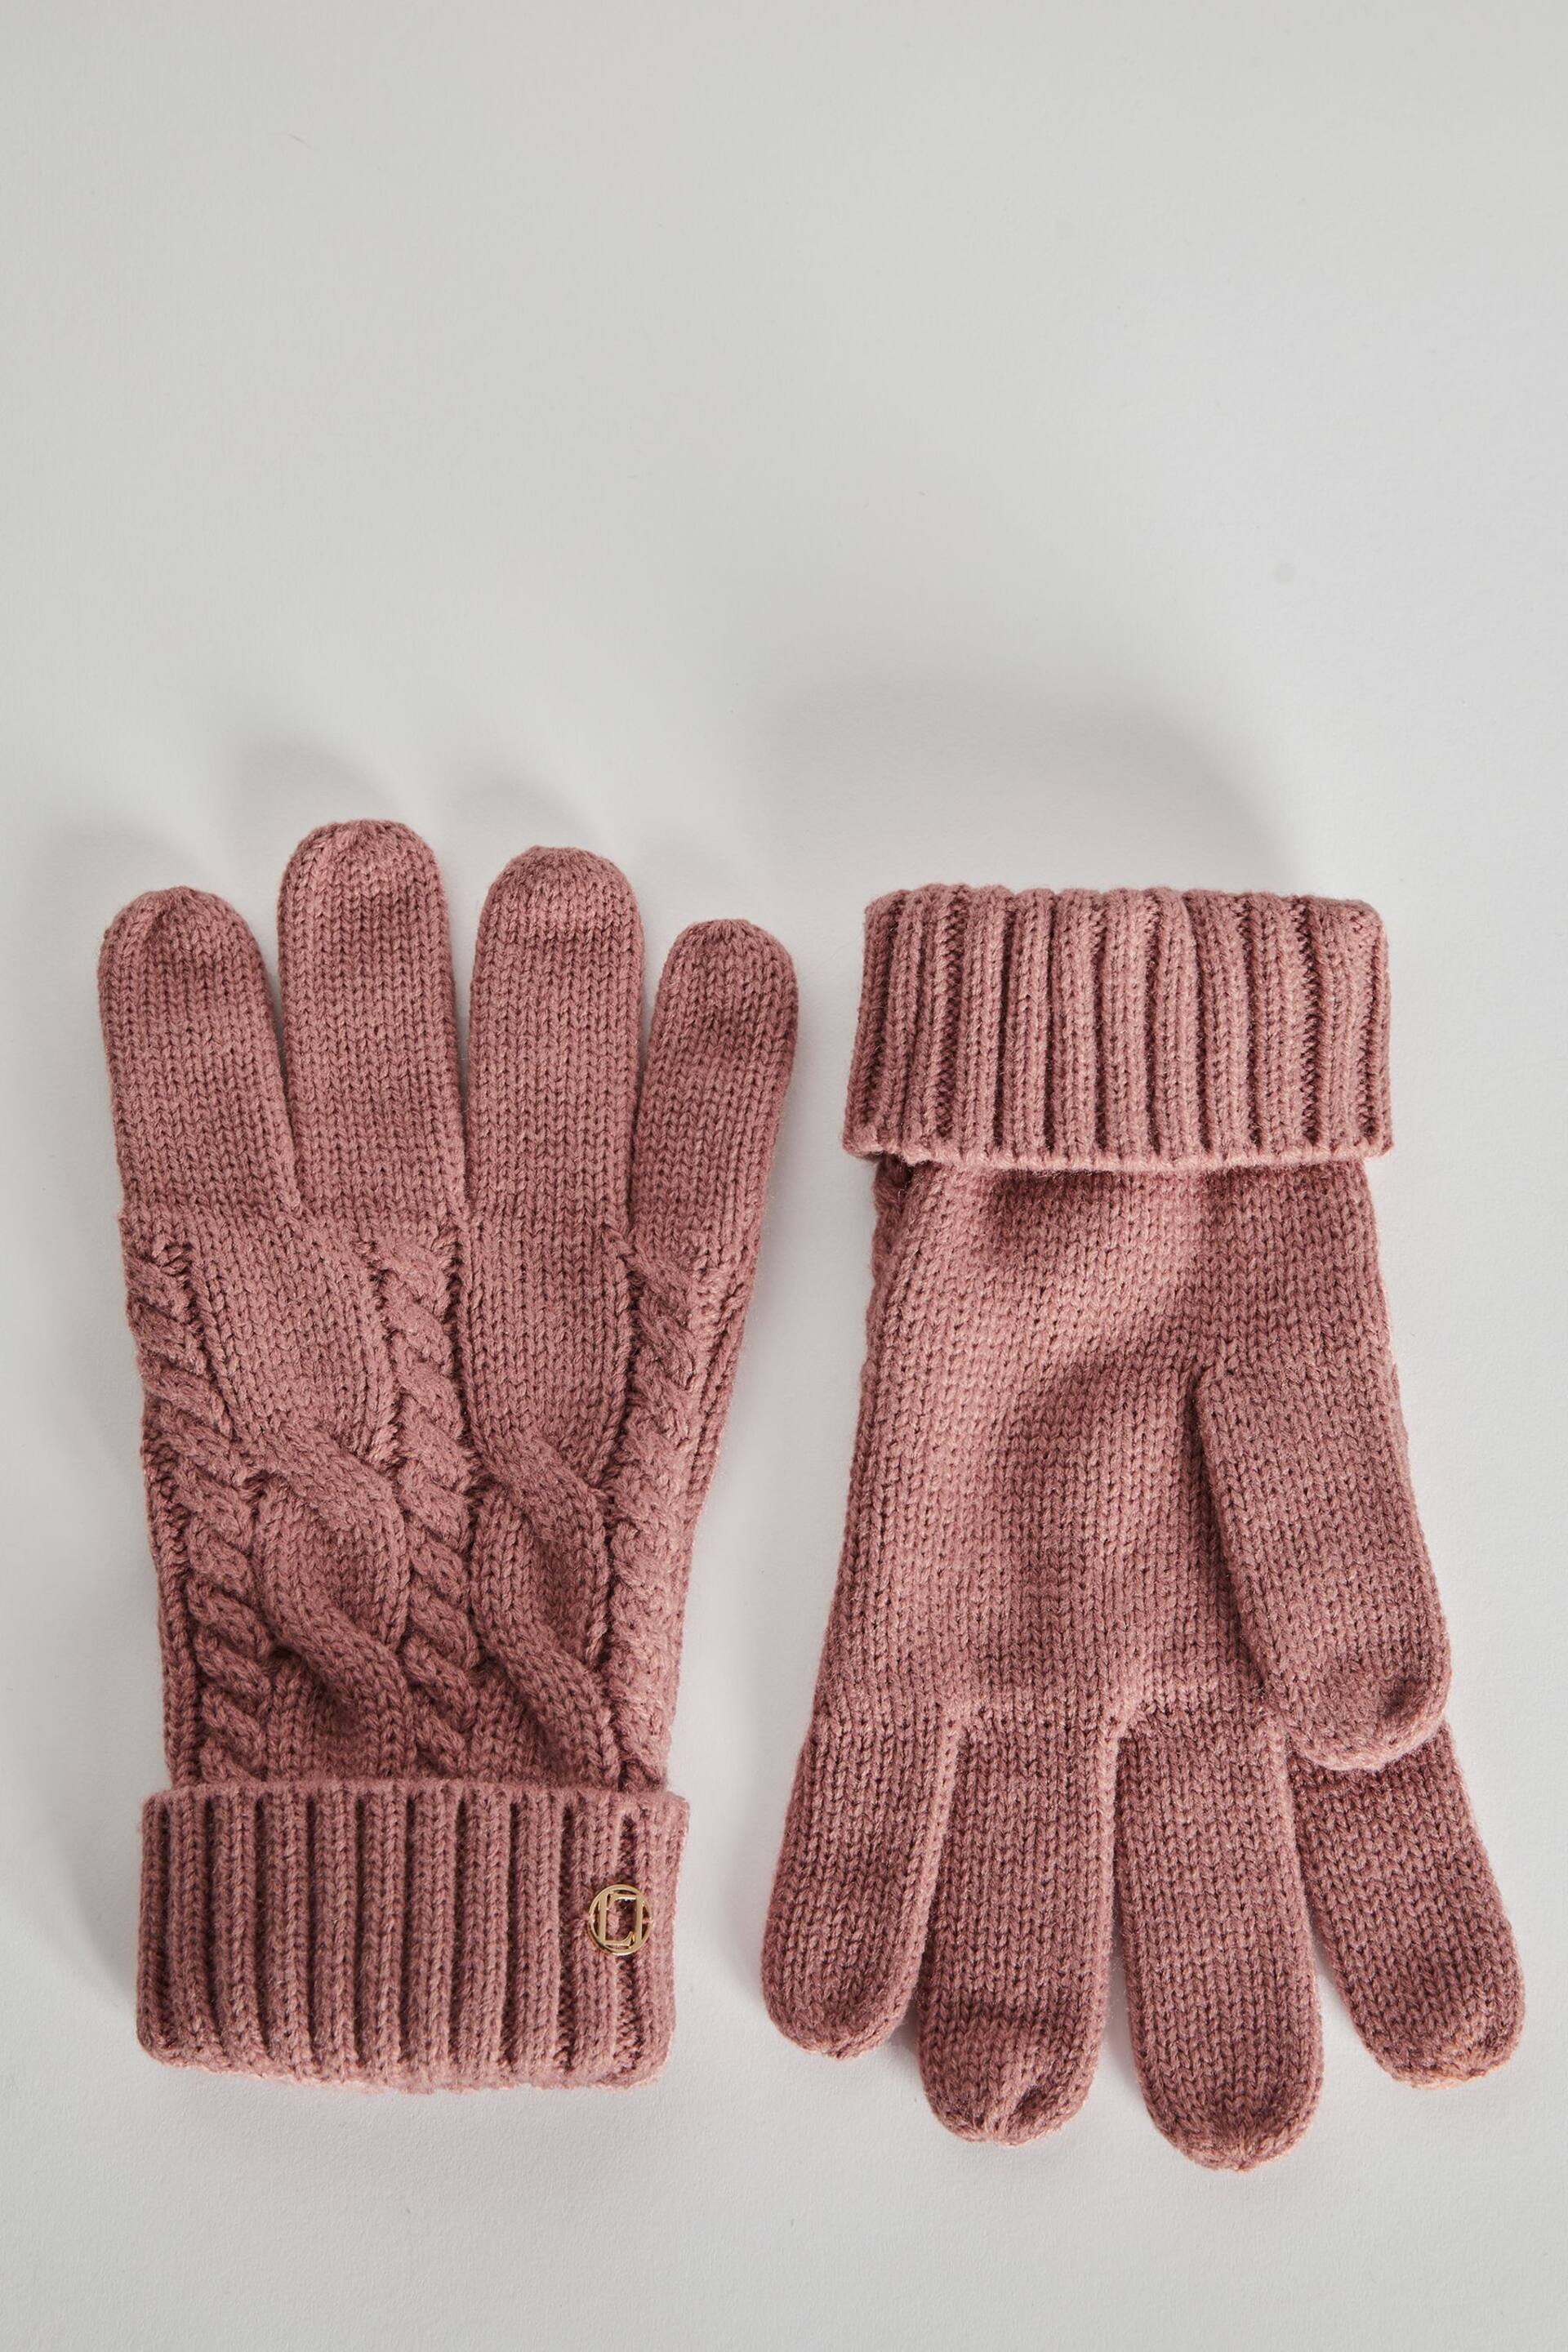 Lipsy Pink Cosy Cable Gloves - Image 1 of 2